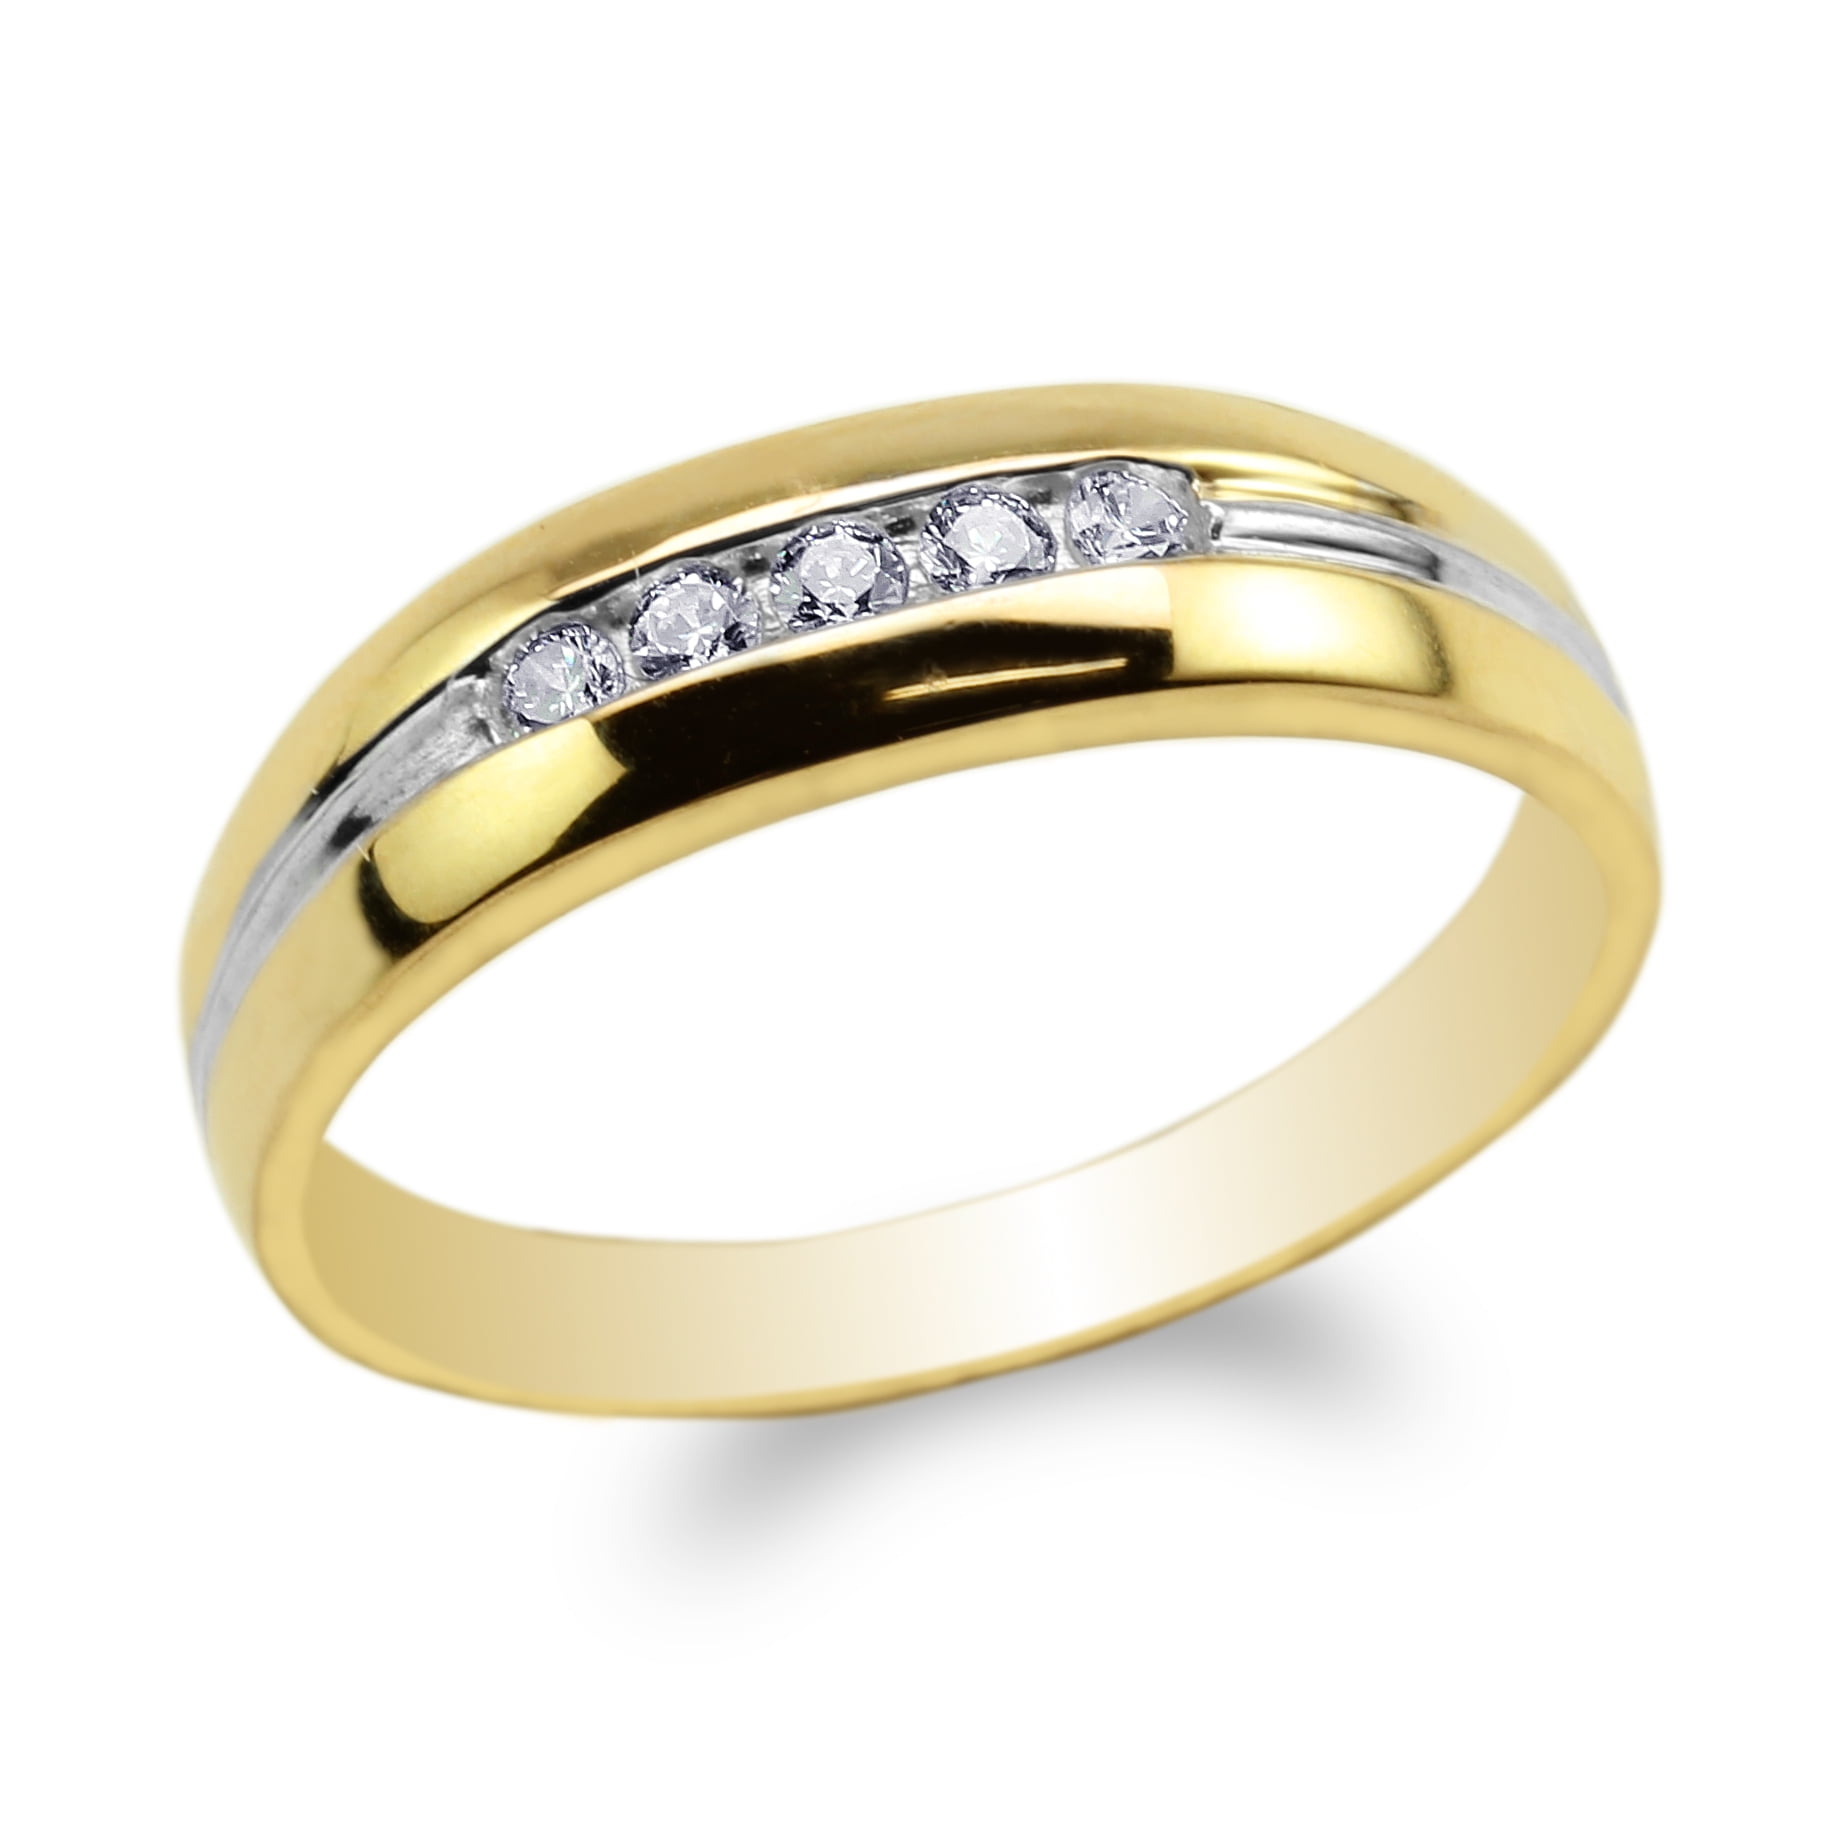 SVC-JEWELS Mens 14k Yellow Gold Over Channel Set Round White CZ Diamond Wedding Band Anniversary Ring